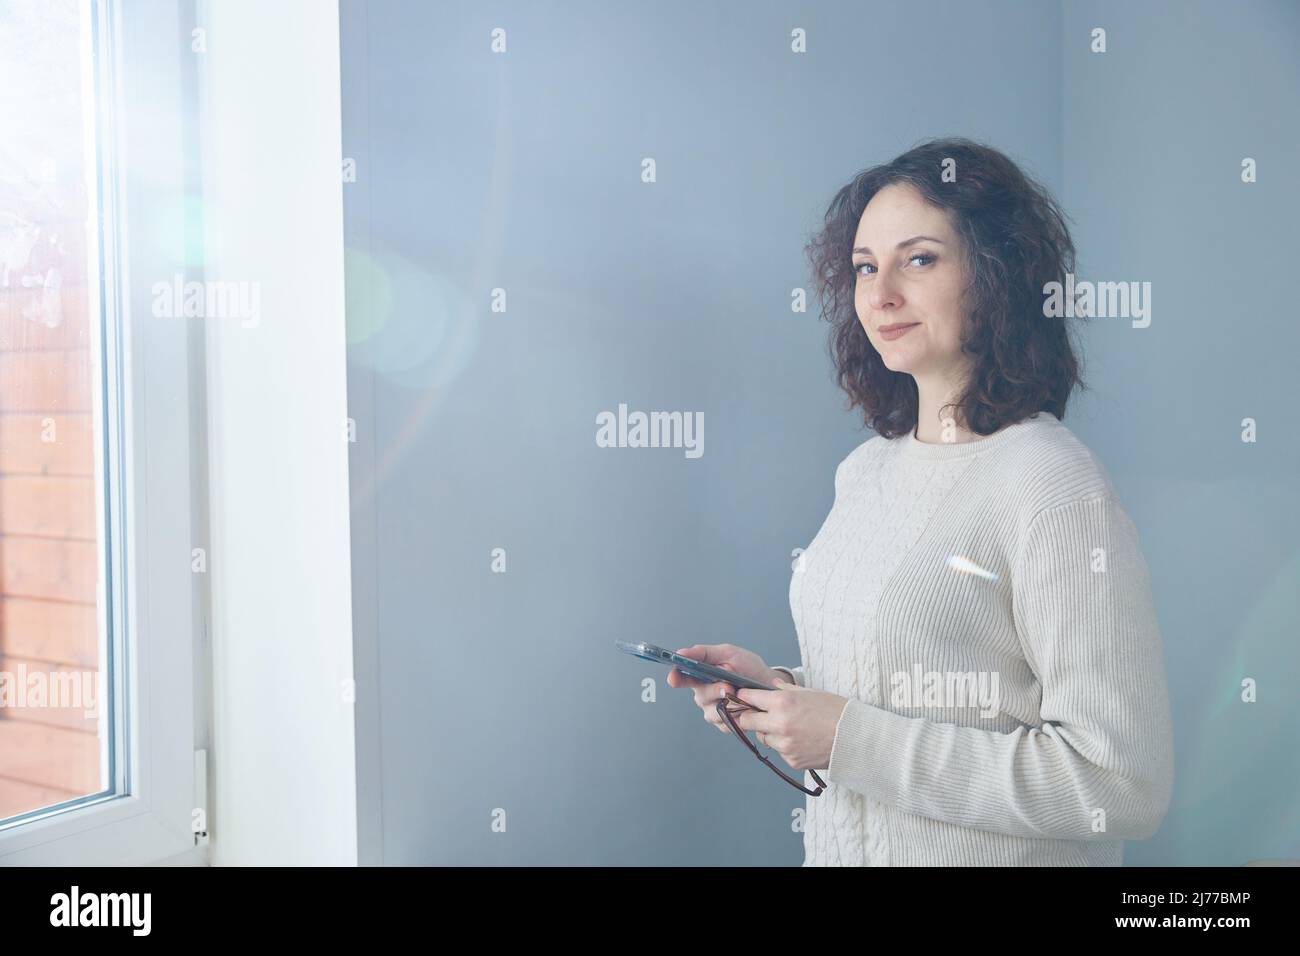 Portrait of a middle-aged brunette standing at the window phone Stock Photo